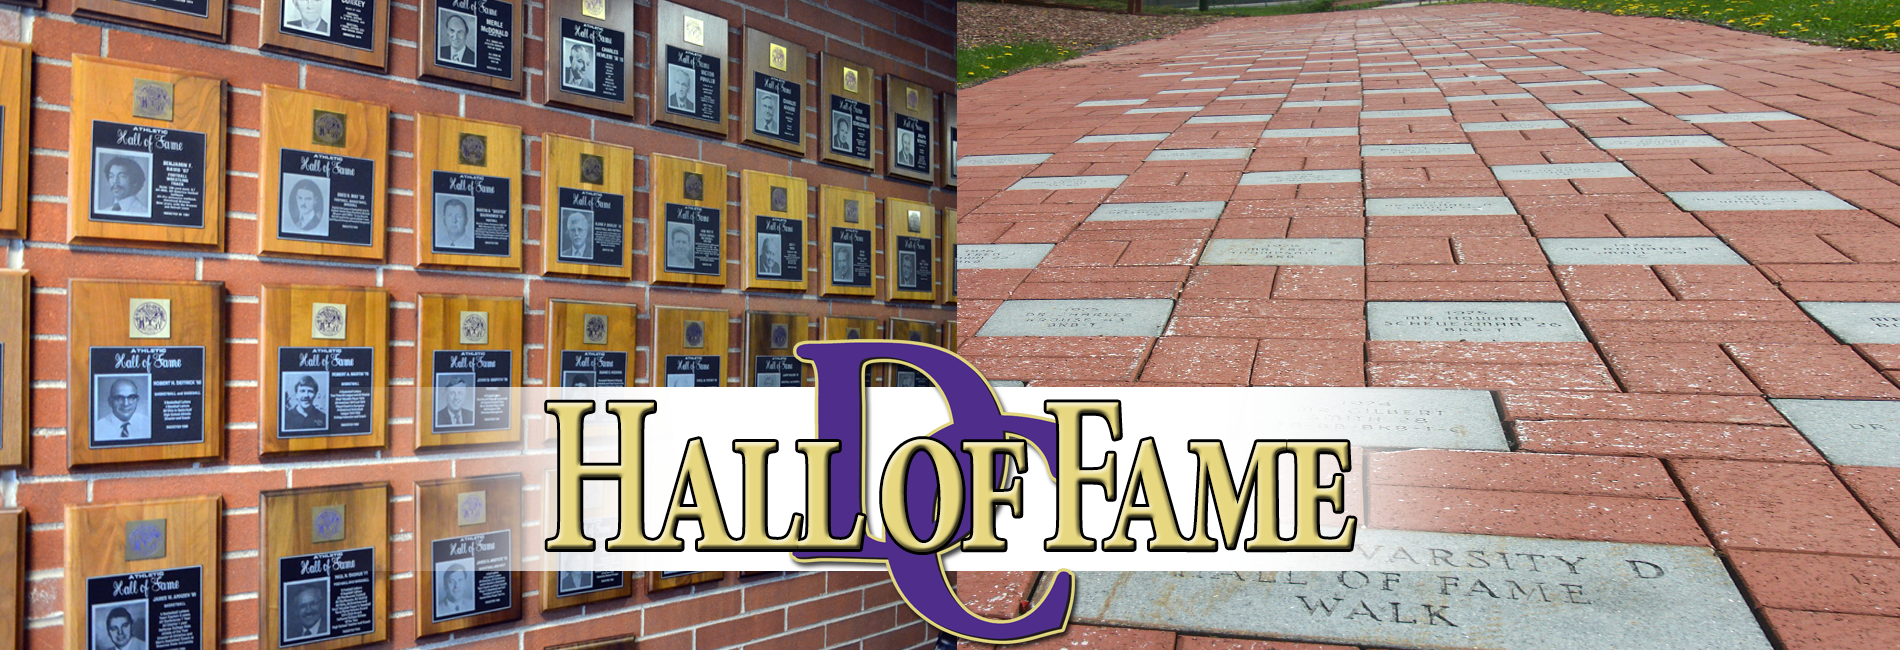 Defiance College Athletic Hall of Fame